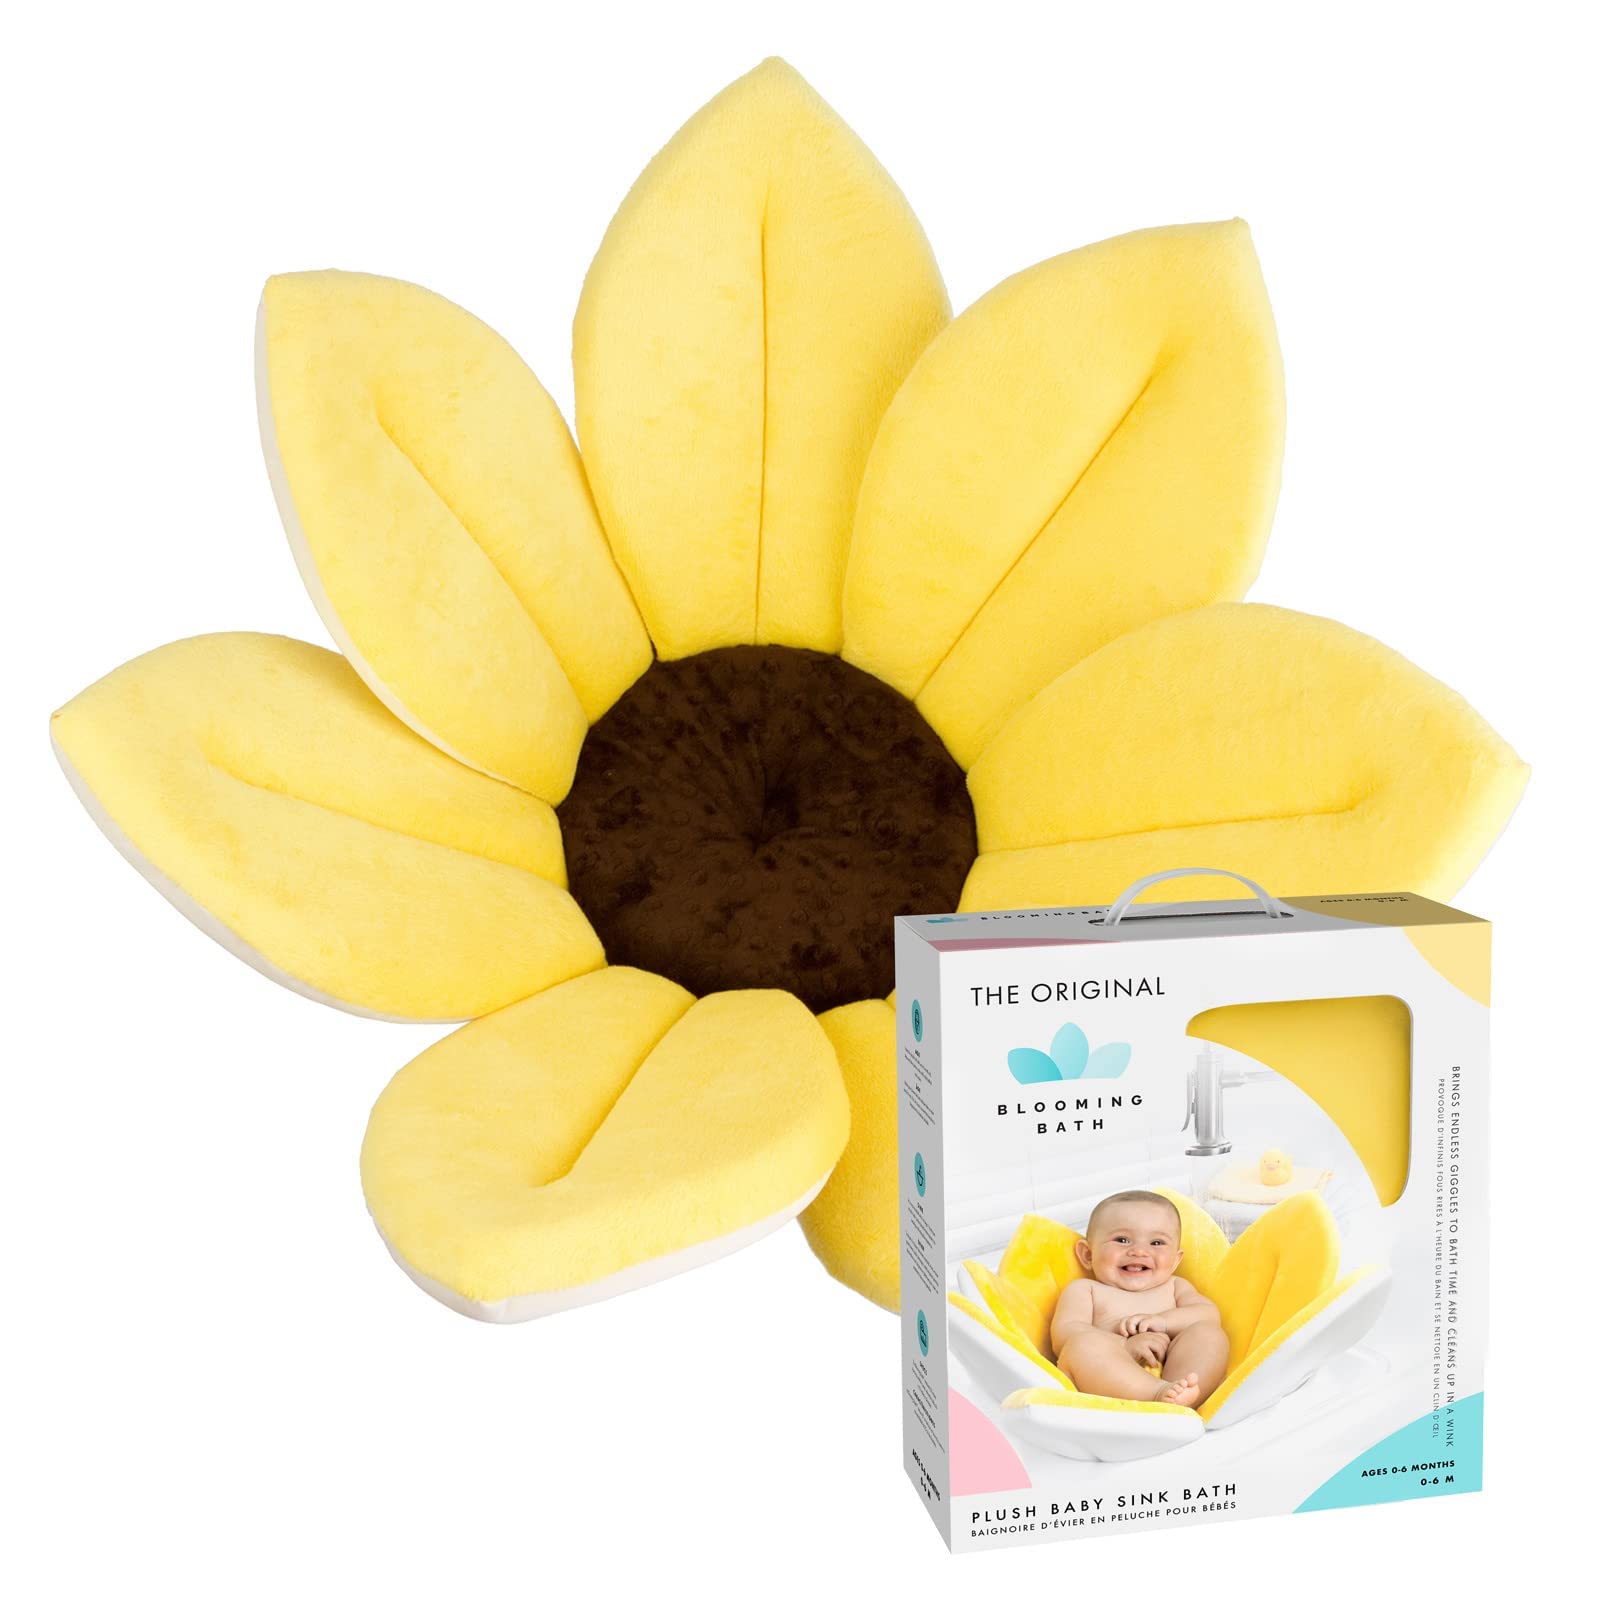 Blooming Bath Original Baby Bath Seat - Sink Flower Bath Mat for Baby Newborn to 6 Months - Washer-Safe Infant Newborn Essentials - Baby Shower Gifts for New Mom (Canary Yellow)